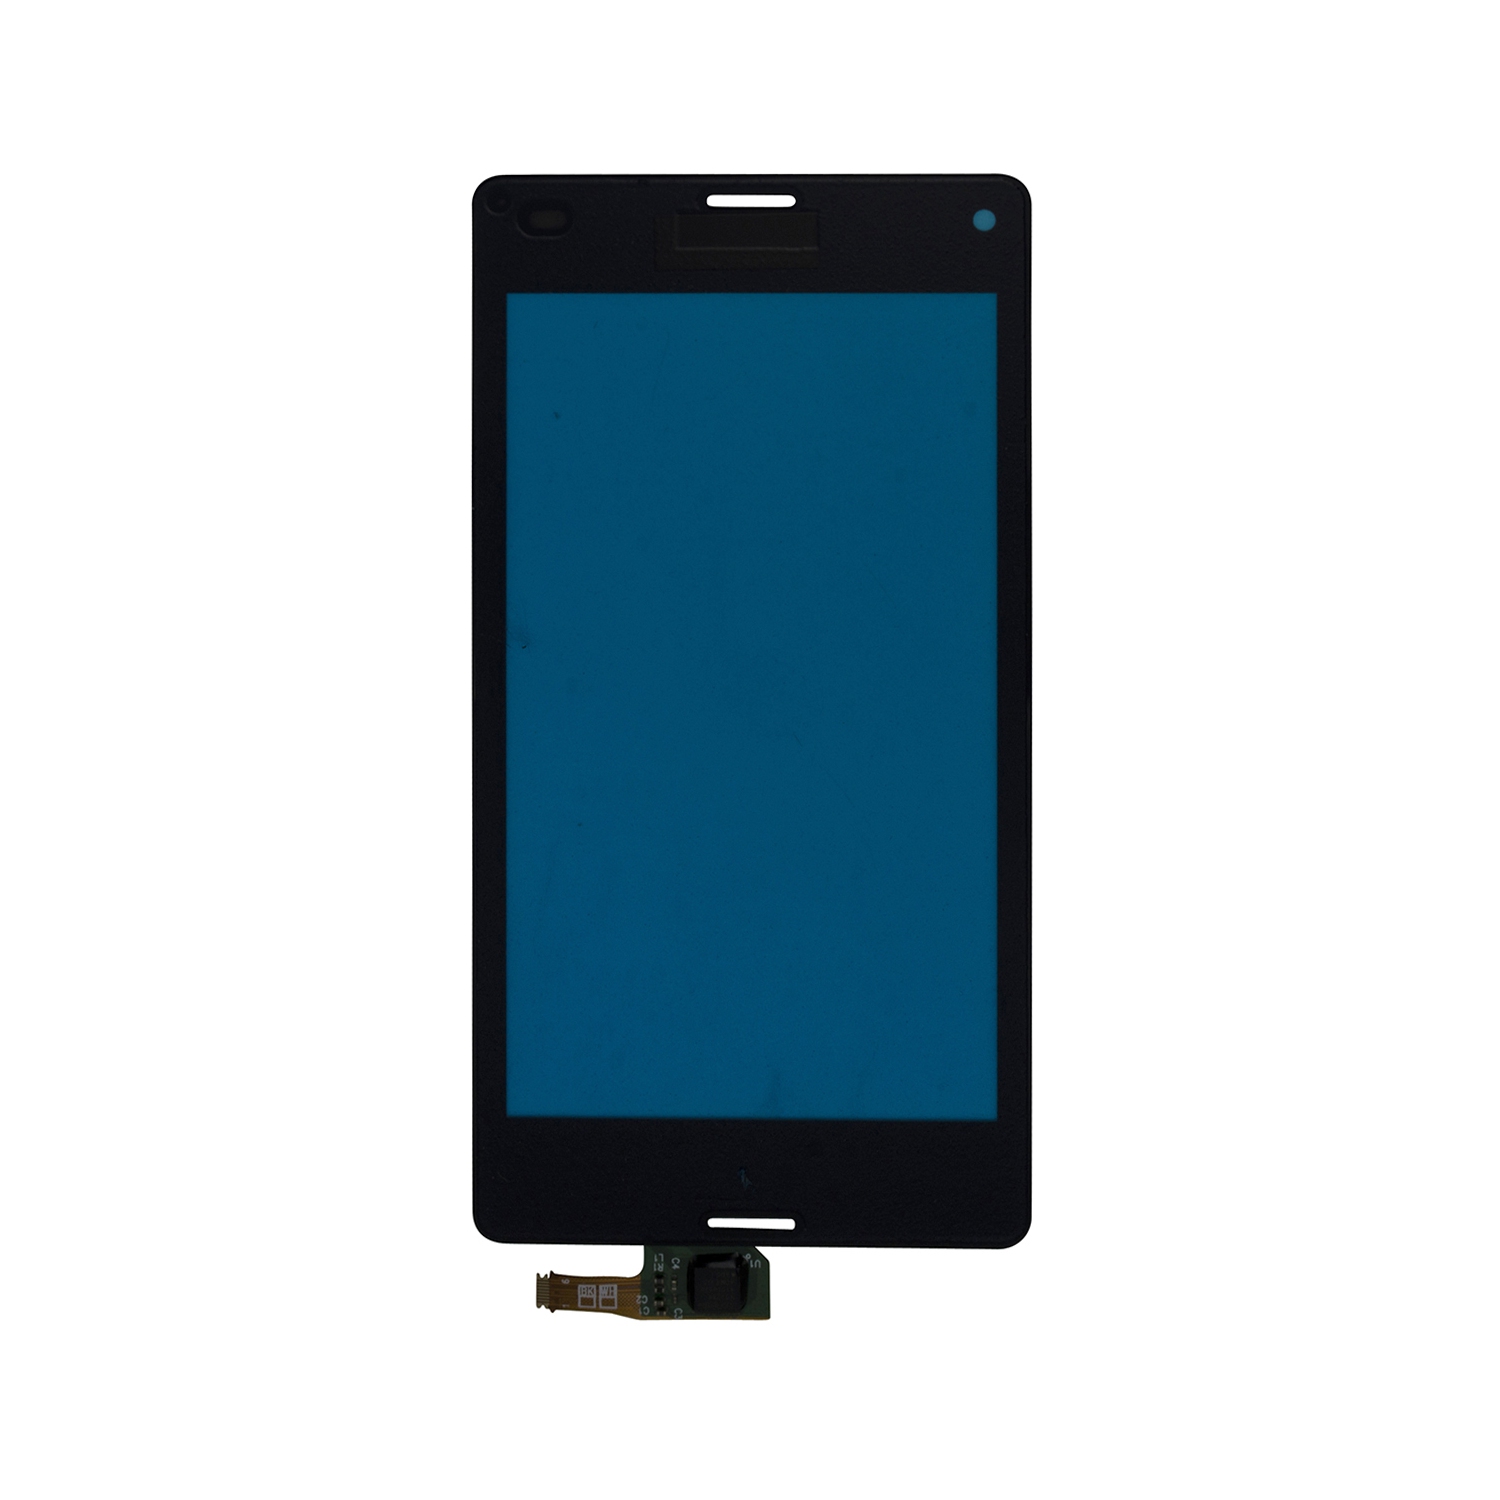 Sony Xperia Z3 Compact Digitizer Touch Screen - Black